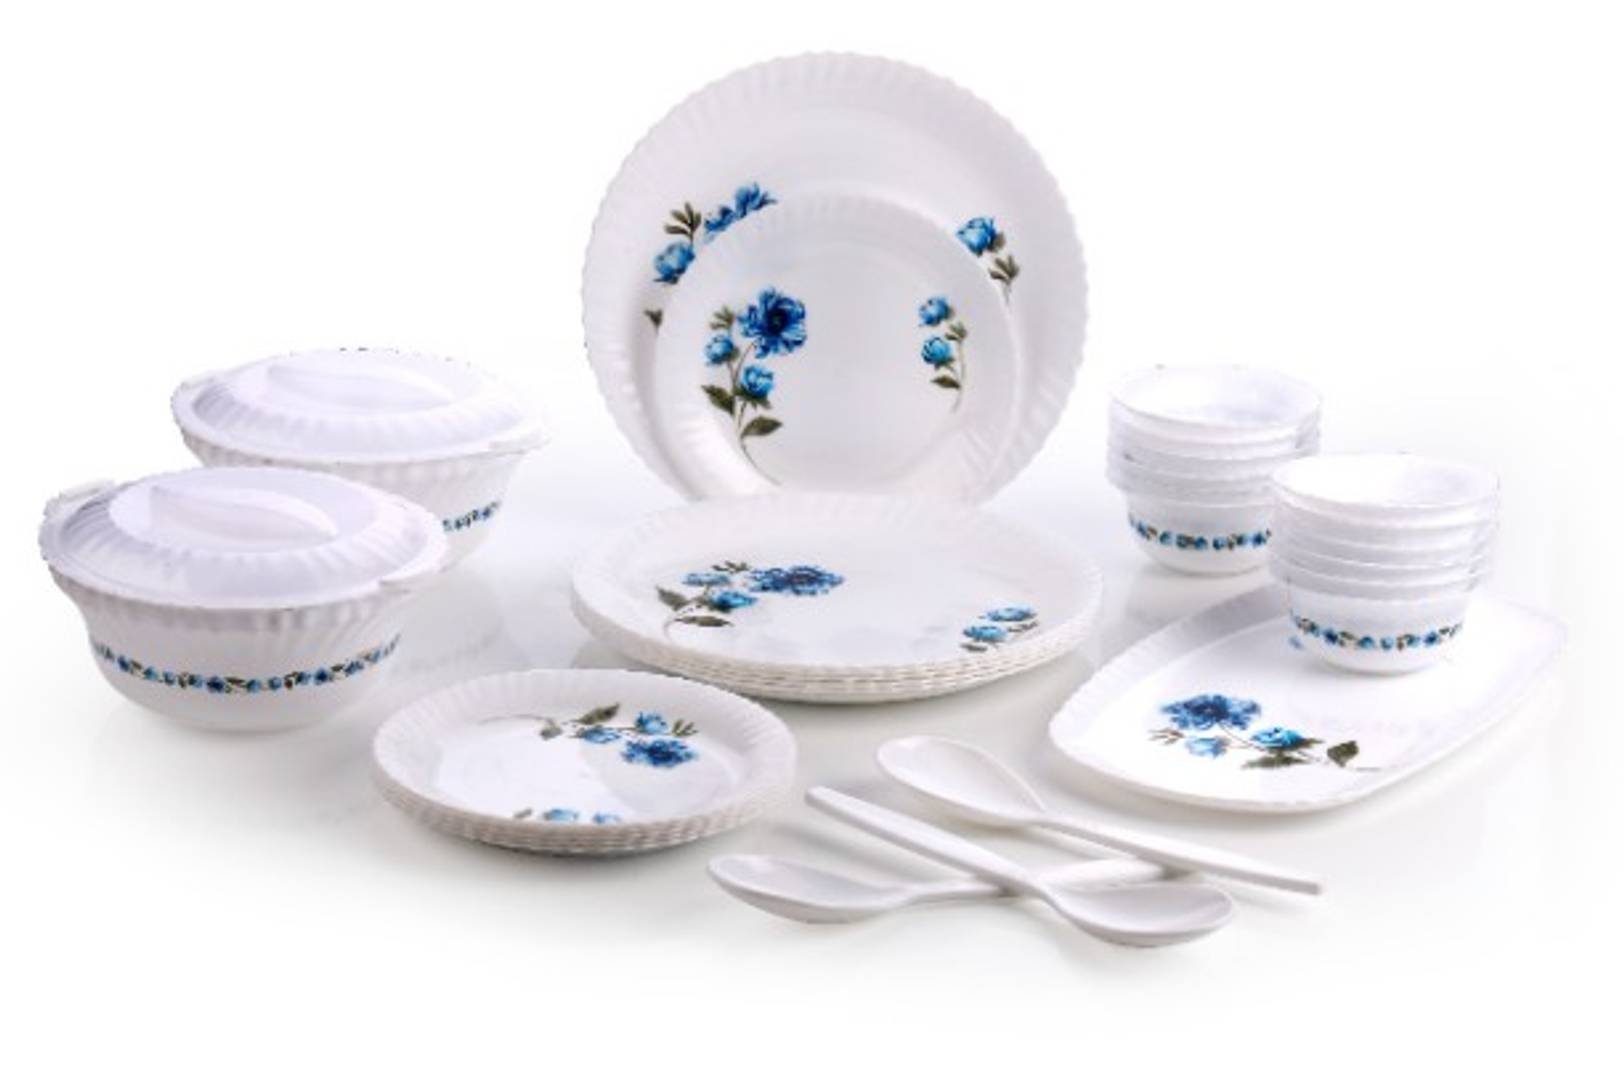  Exclusive and Microwave Safe, Plastic Printed Round Flourish Dinner Set of 36 Pieces